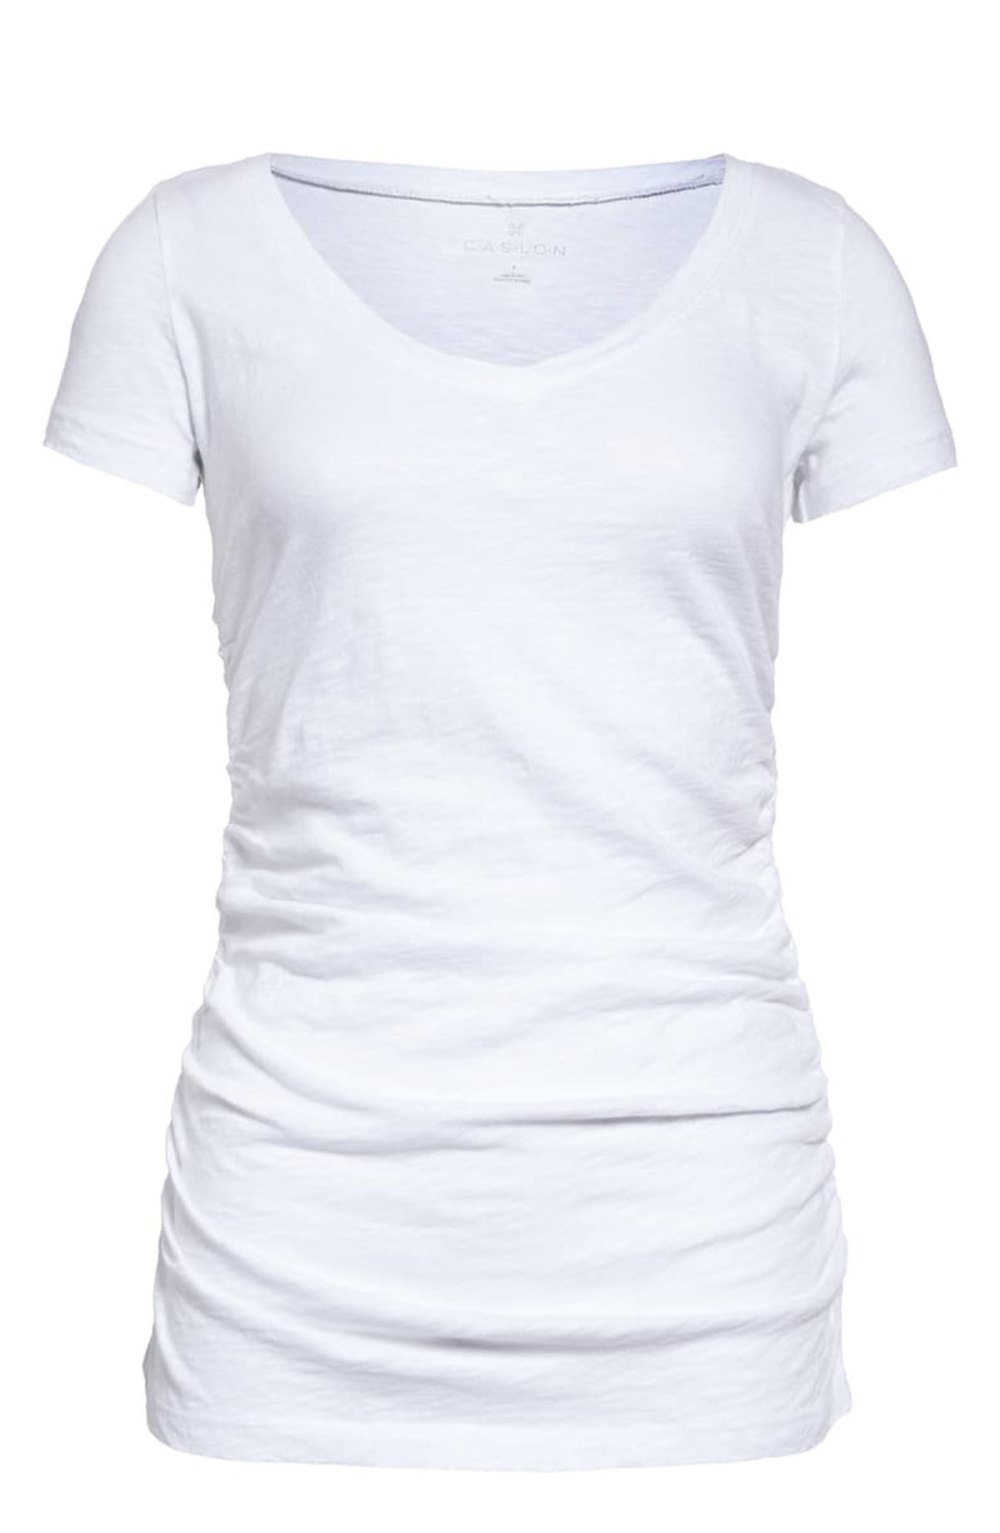 t-shirt-nordstrom-one